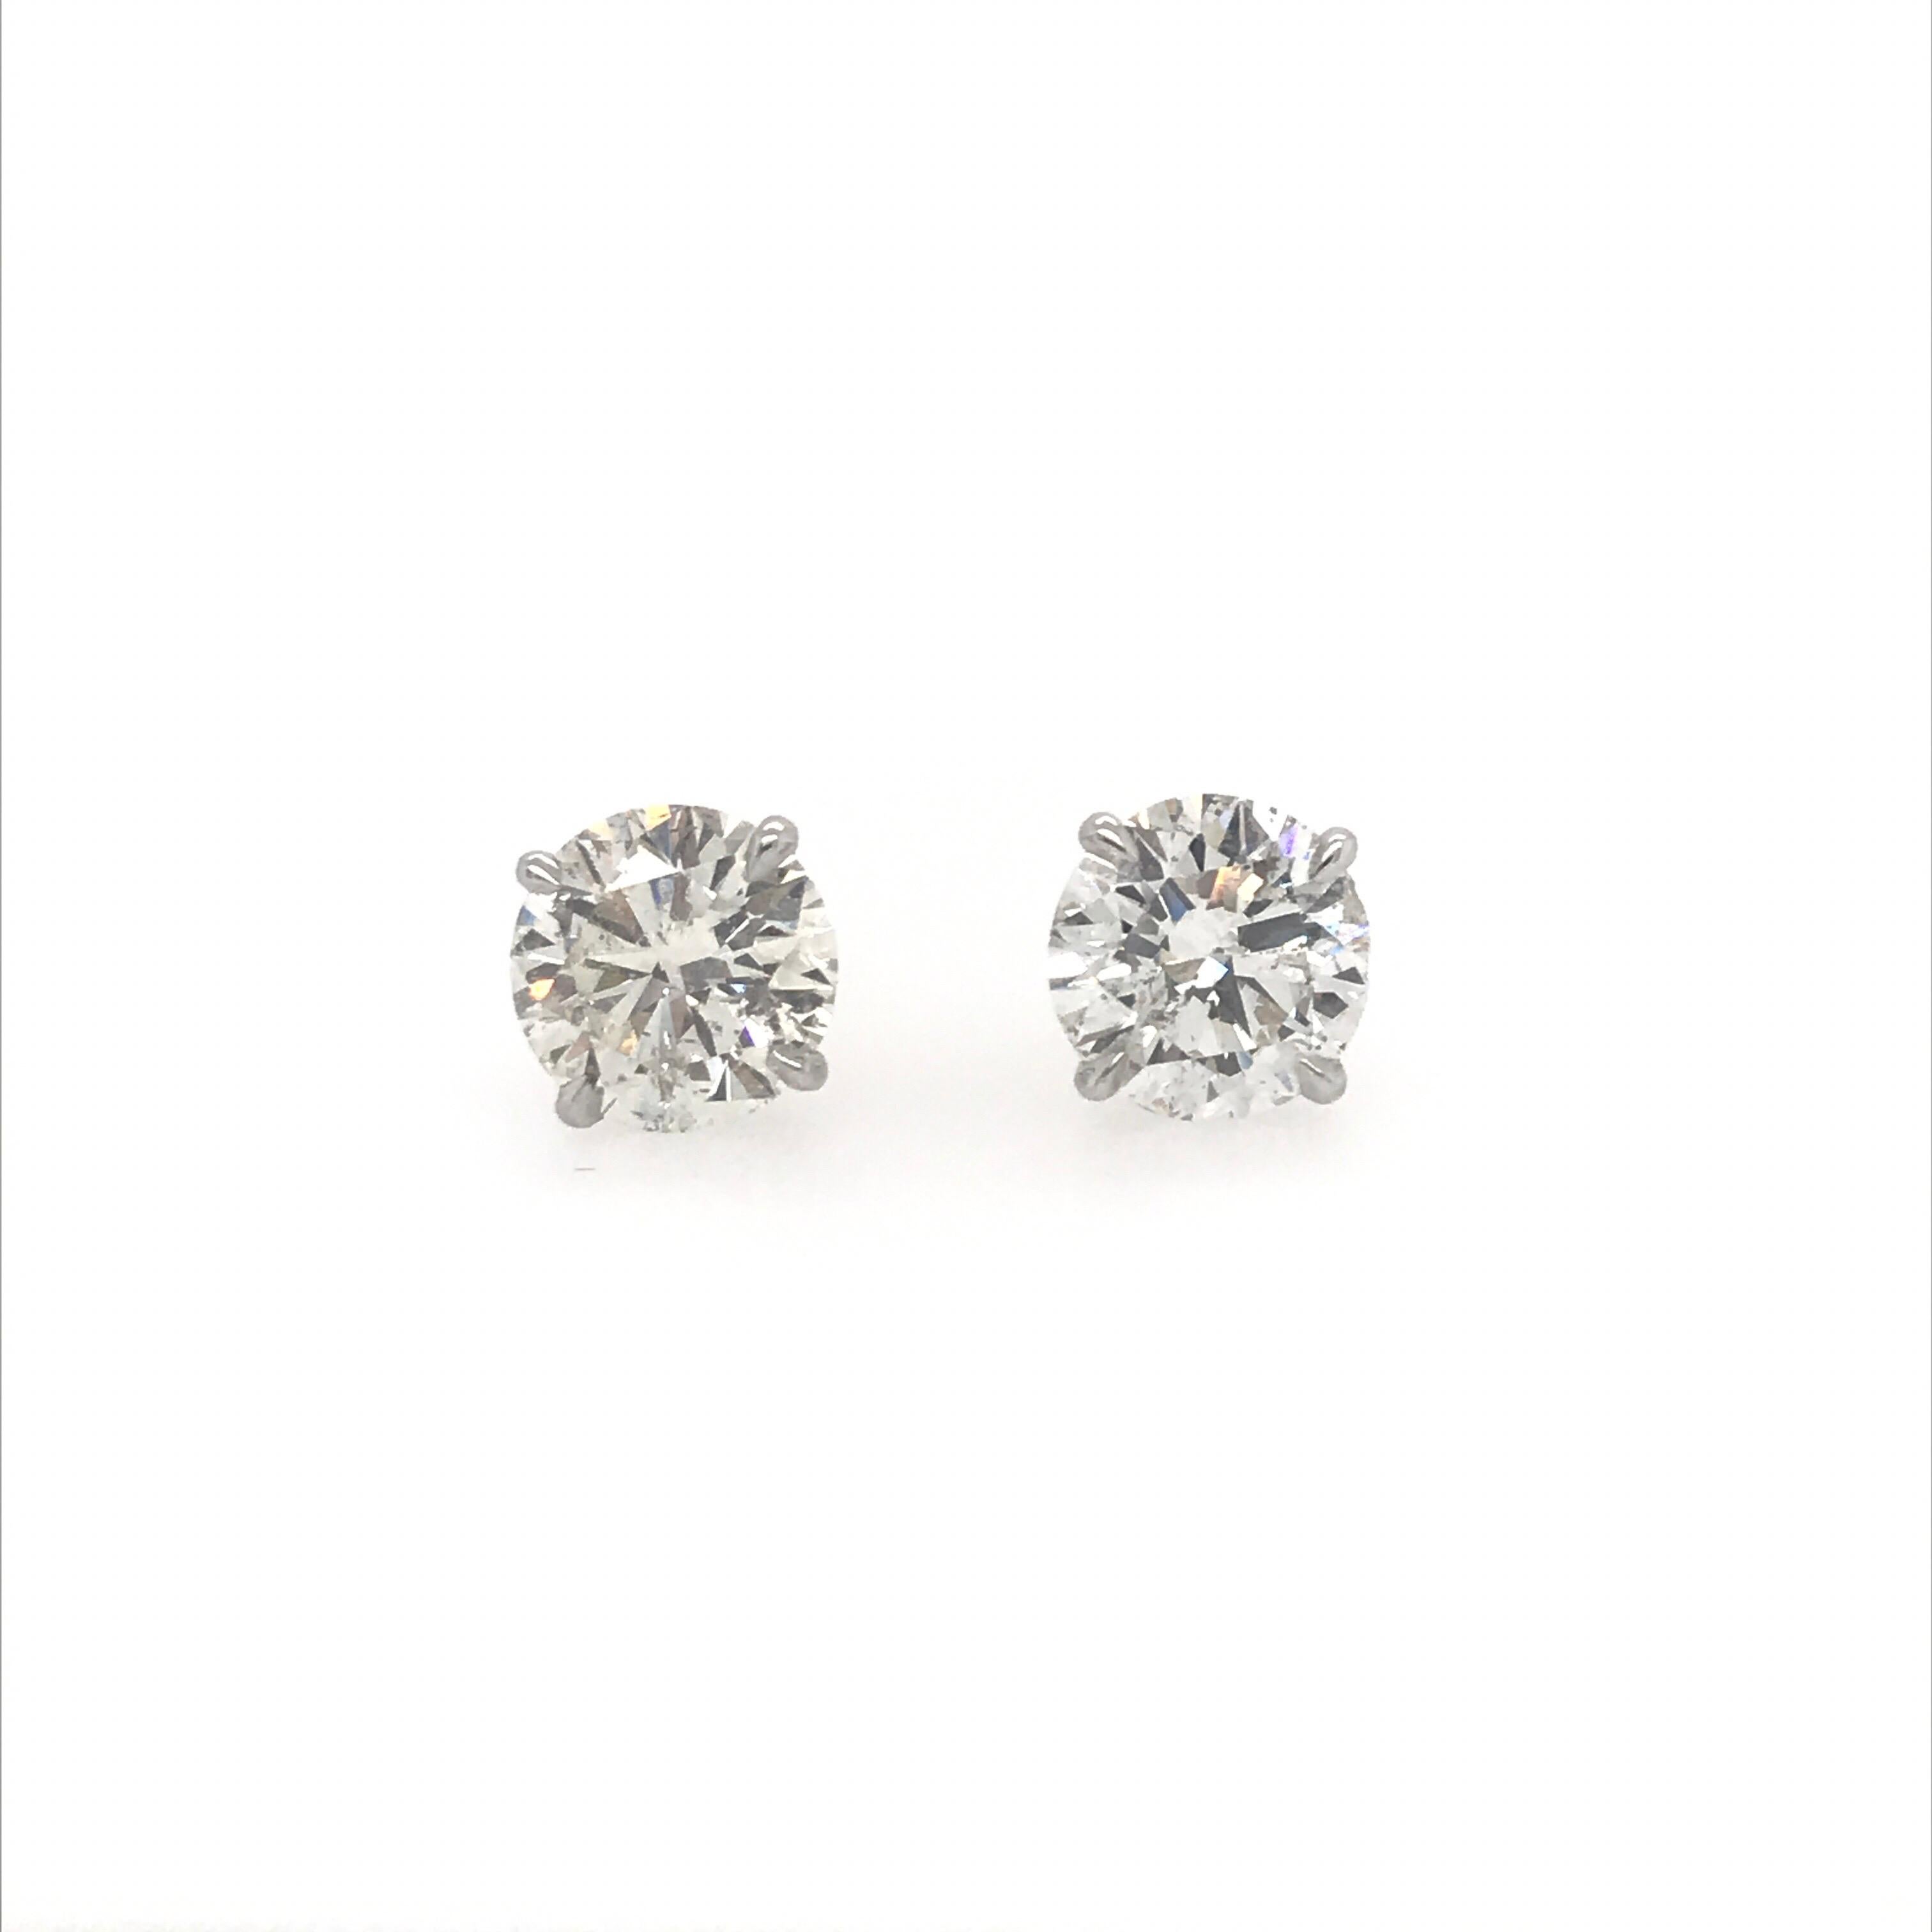 A pair of diamond stud earrings weighing 4.62 carats in 18k white gold four prong champagne setting. 
Color I-J
Clarity SI3-I1